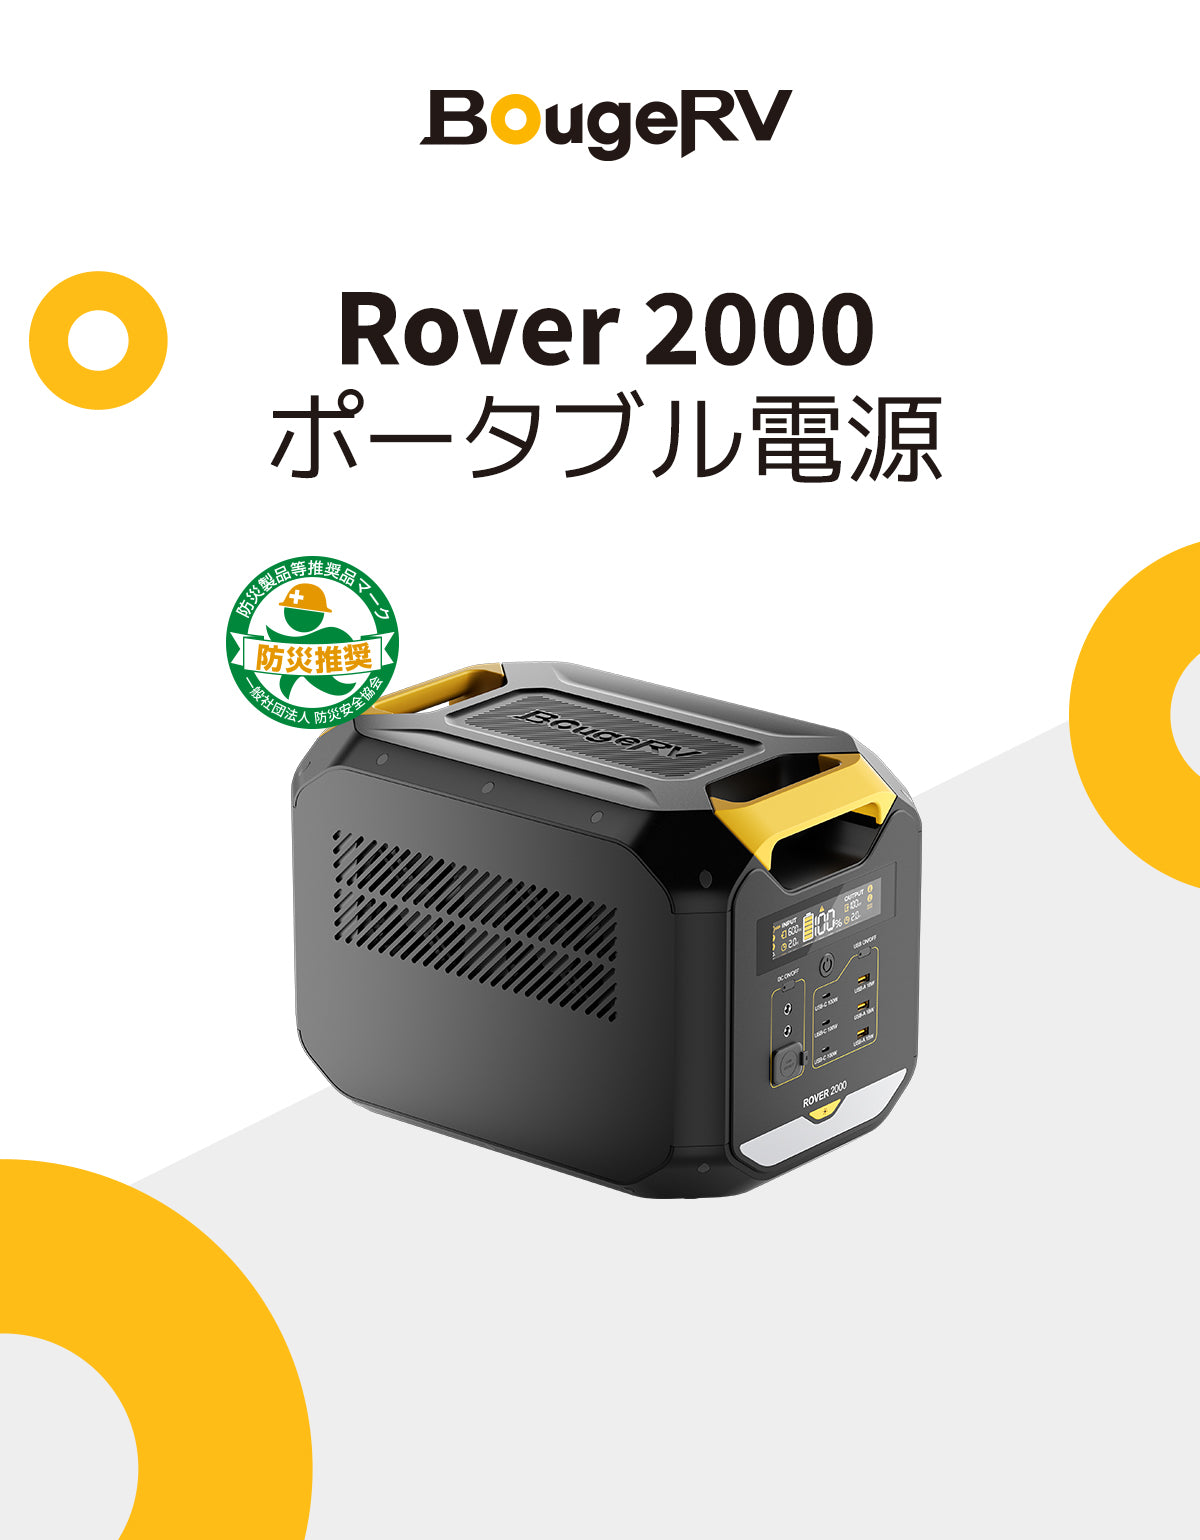 BougeRV Rover 2000 ポータブル電源|2008Wh大容量·半固体電池·急速充電 